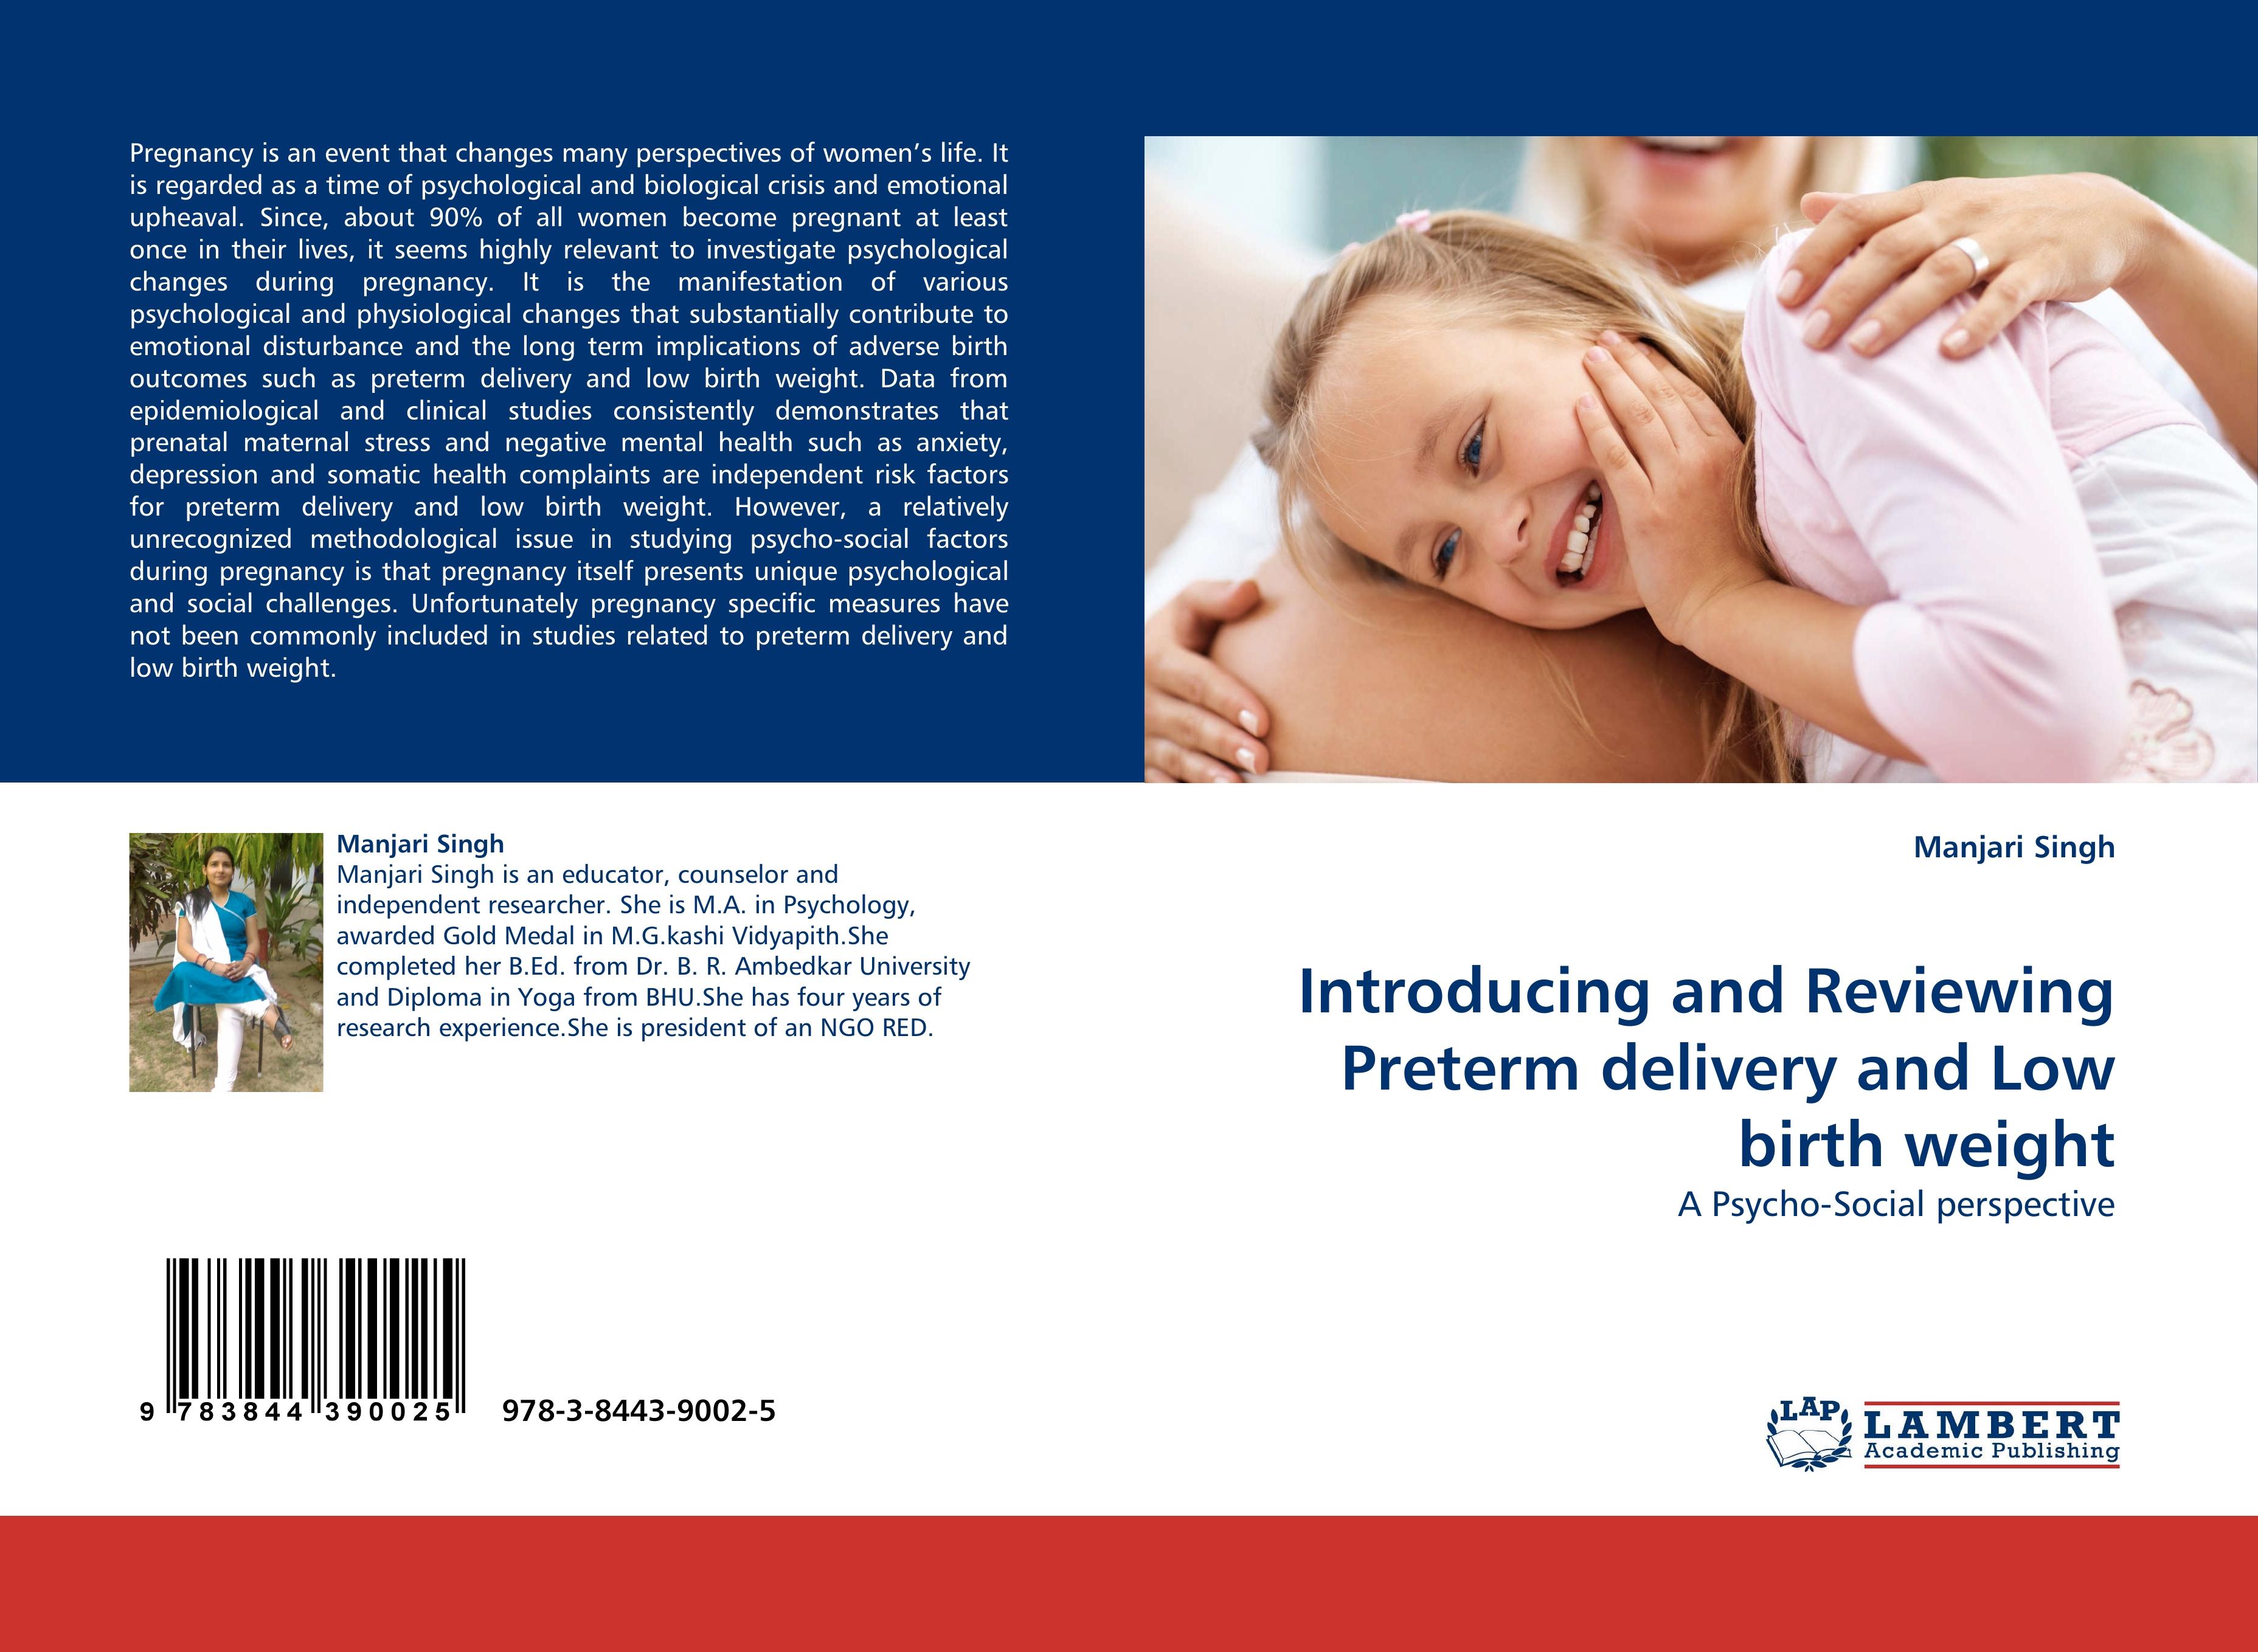 Introducing and Reviewing Preterm delivery and Low birth weight - Manjari Singh